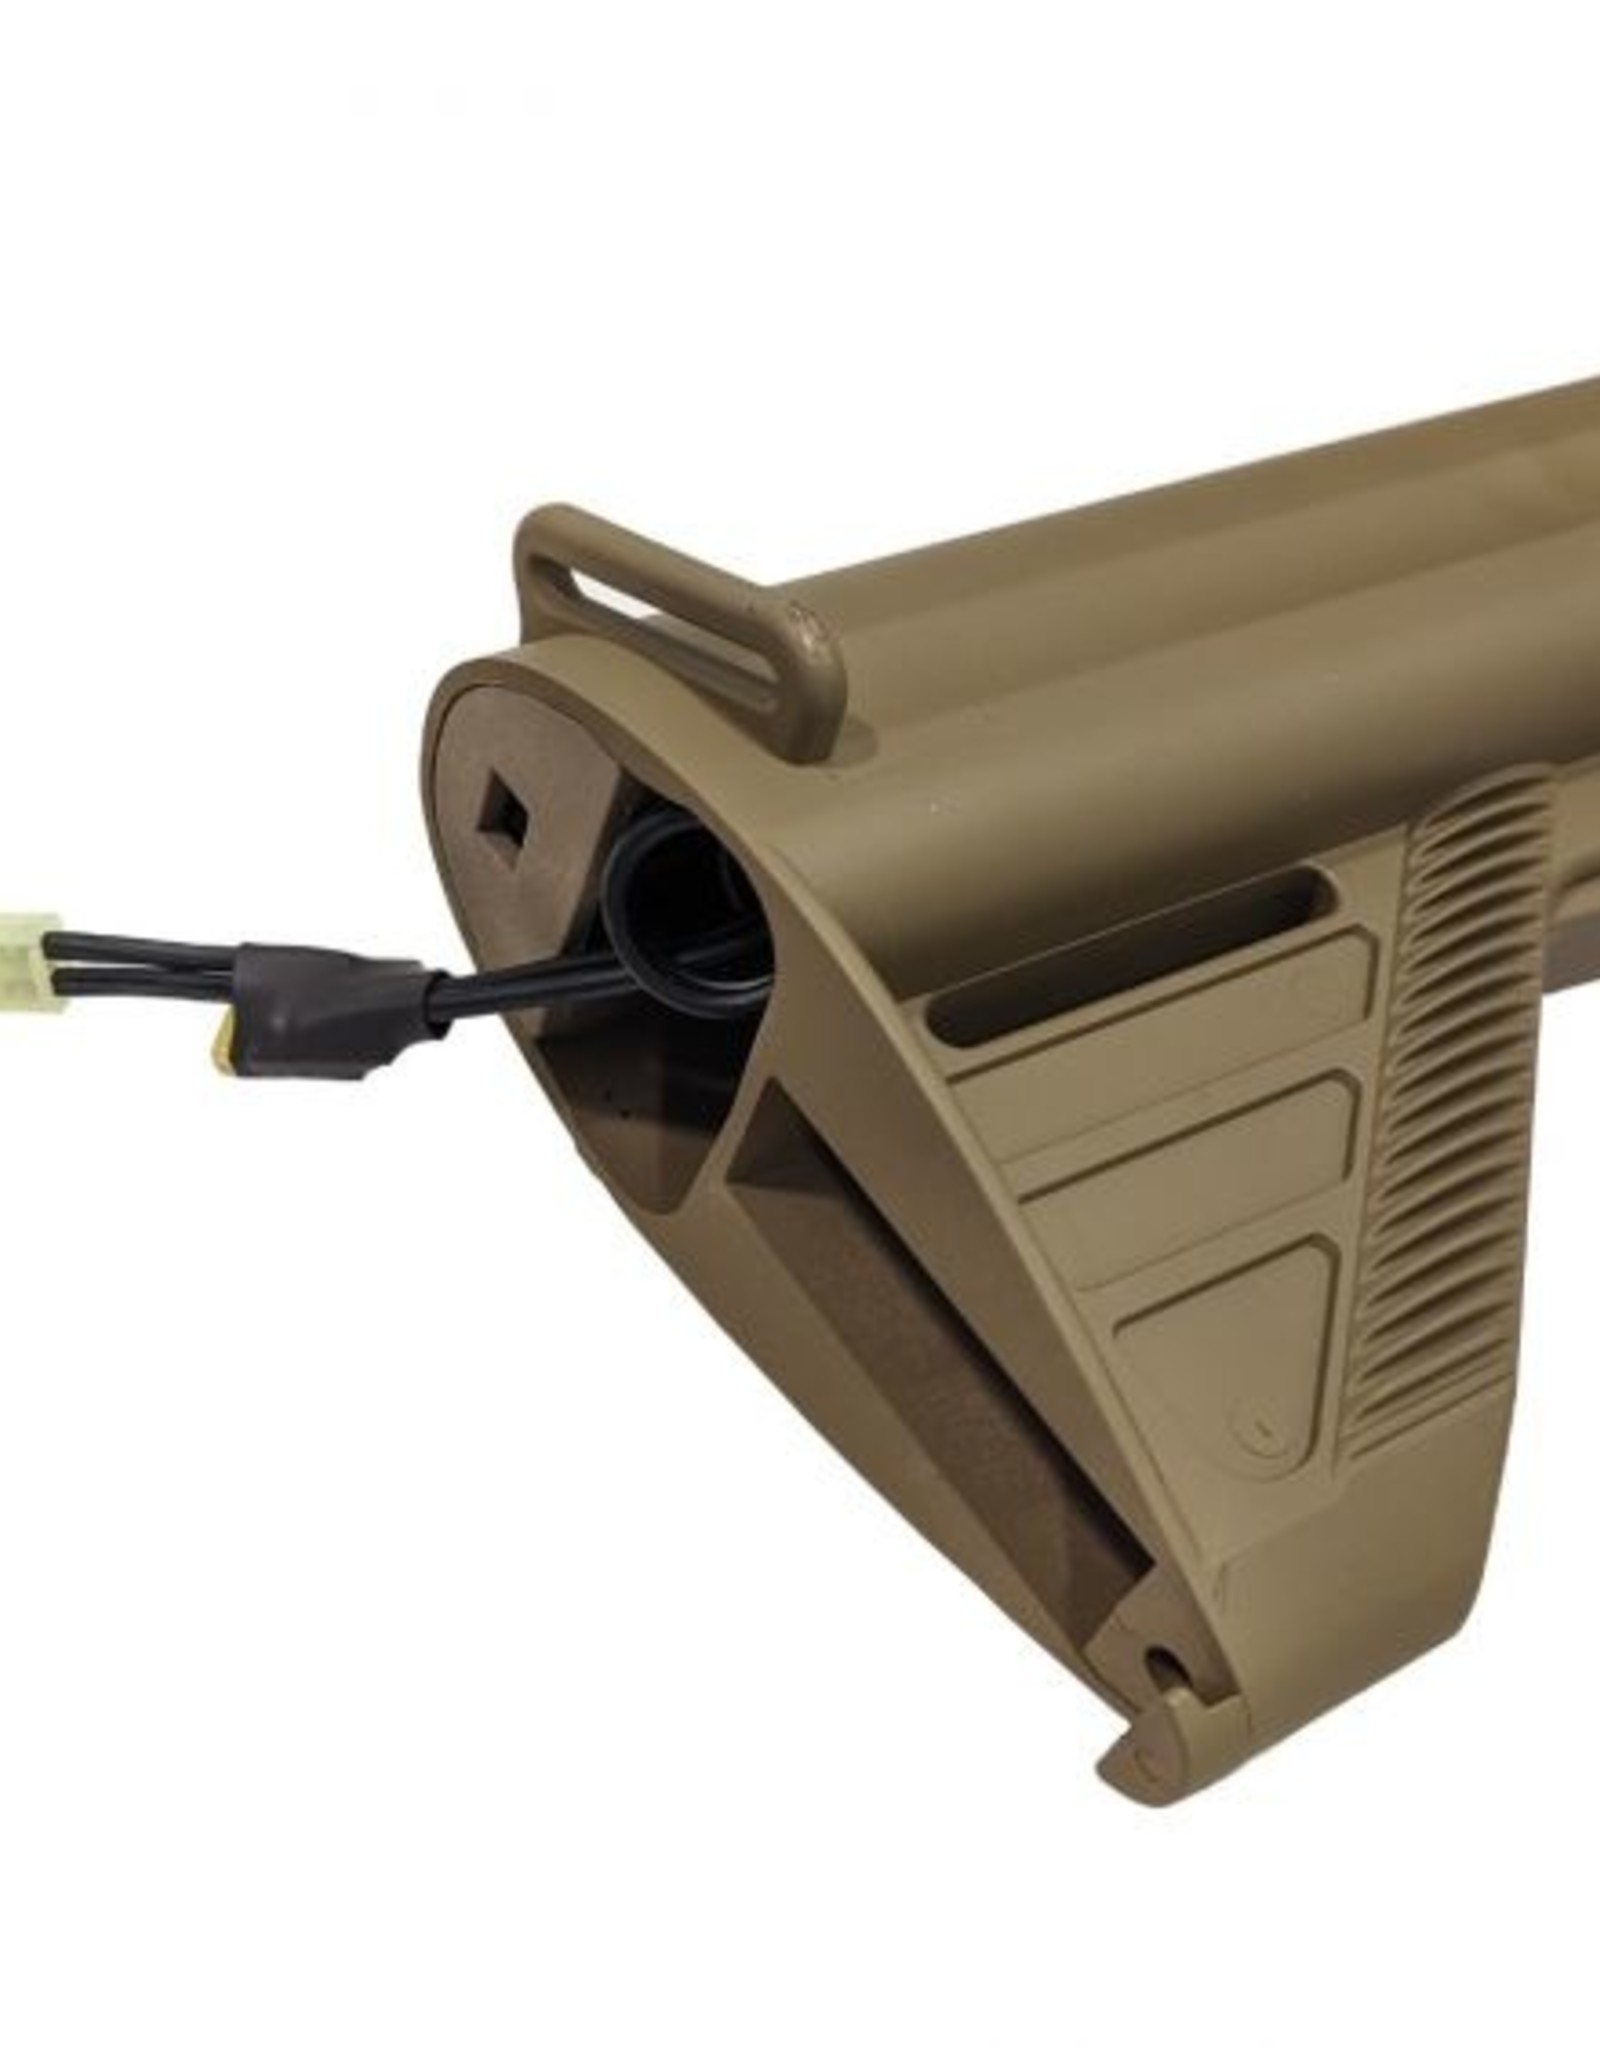 GOLDEN EAGLE Golden Eagle 417 AEG Rifle with Mosfet (Polymer - E6906T - Tan)